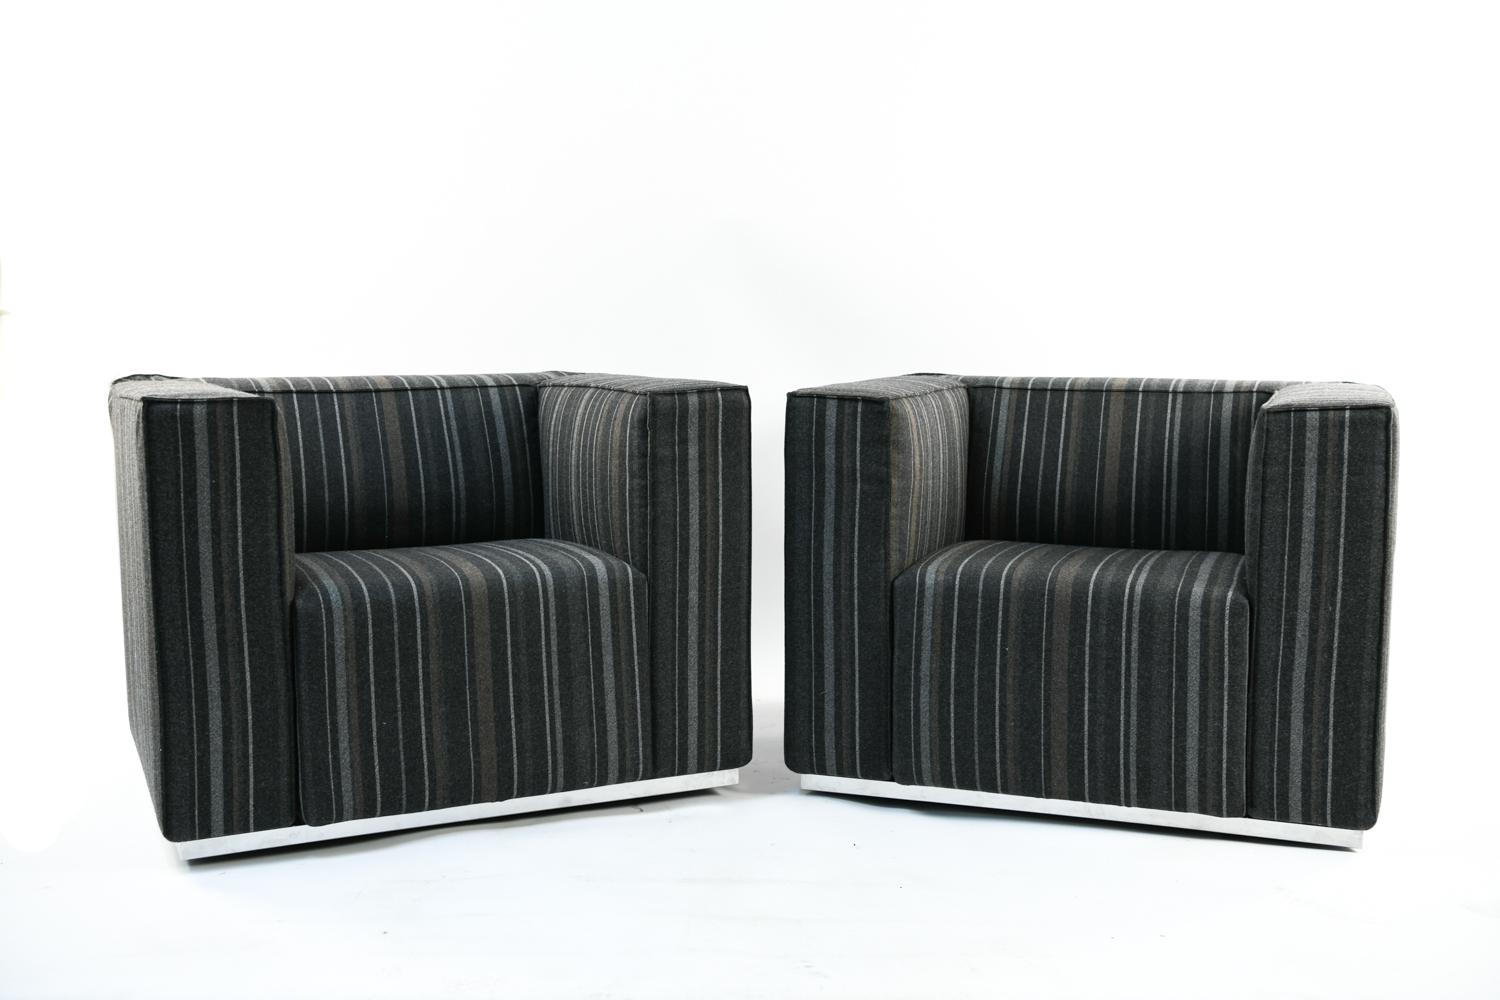 In striped fabric. A pair of Cassina ‘180 Blox’ lounge chairs by Jehs and Laub. The Blox chair was designed by Markus Jehs and Jargon Laub for Cassina.